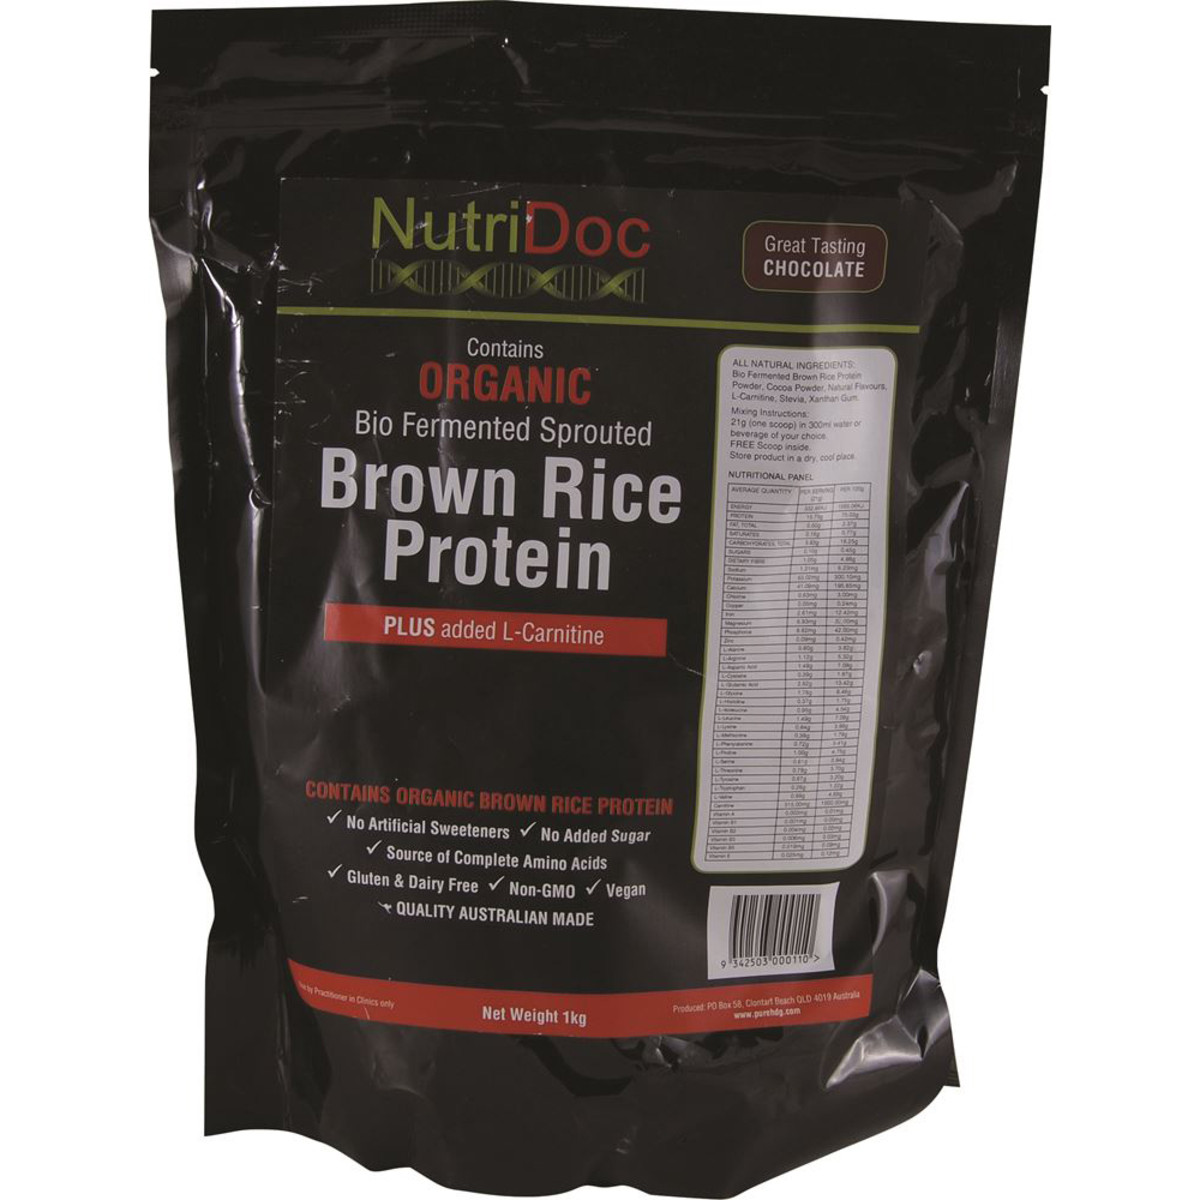 NUTRIDOC - Organic Bio-Fermented Sprouted Brown Rice Protein Chocolate 1kg